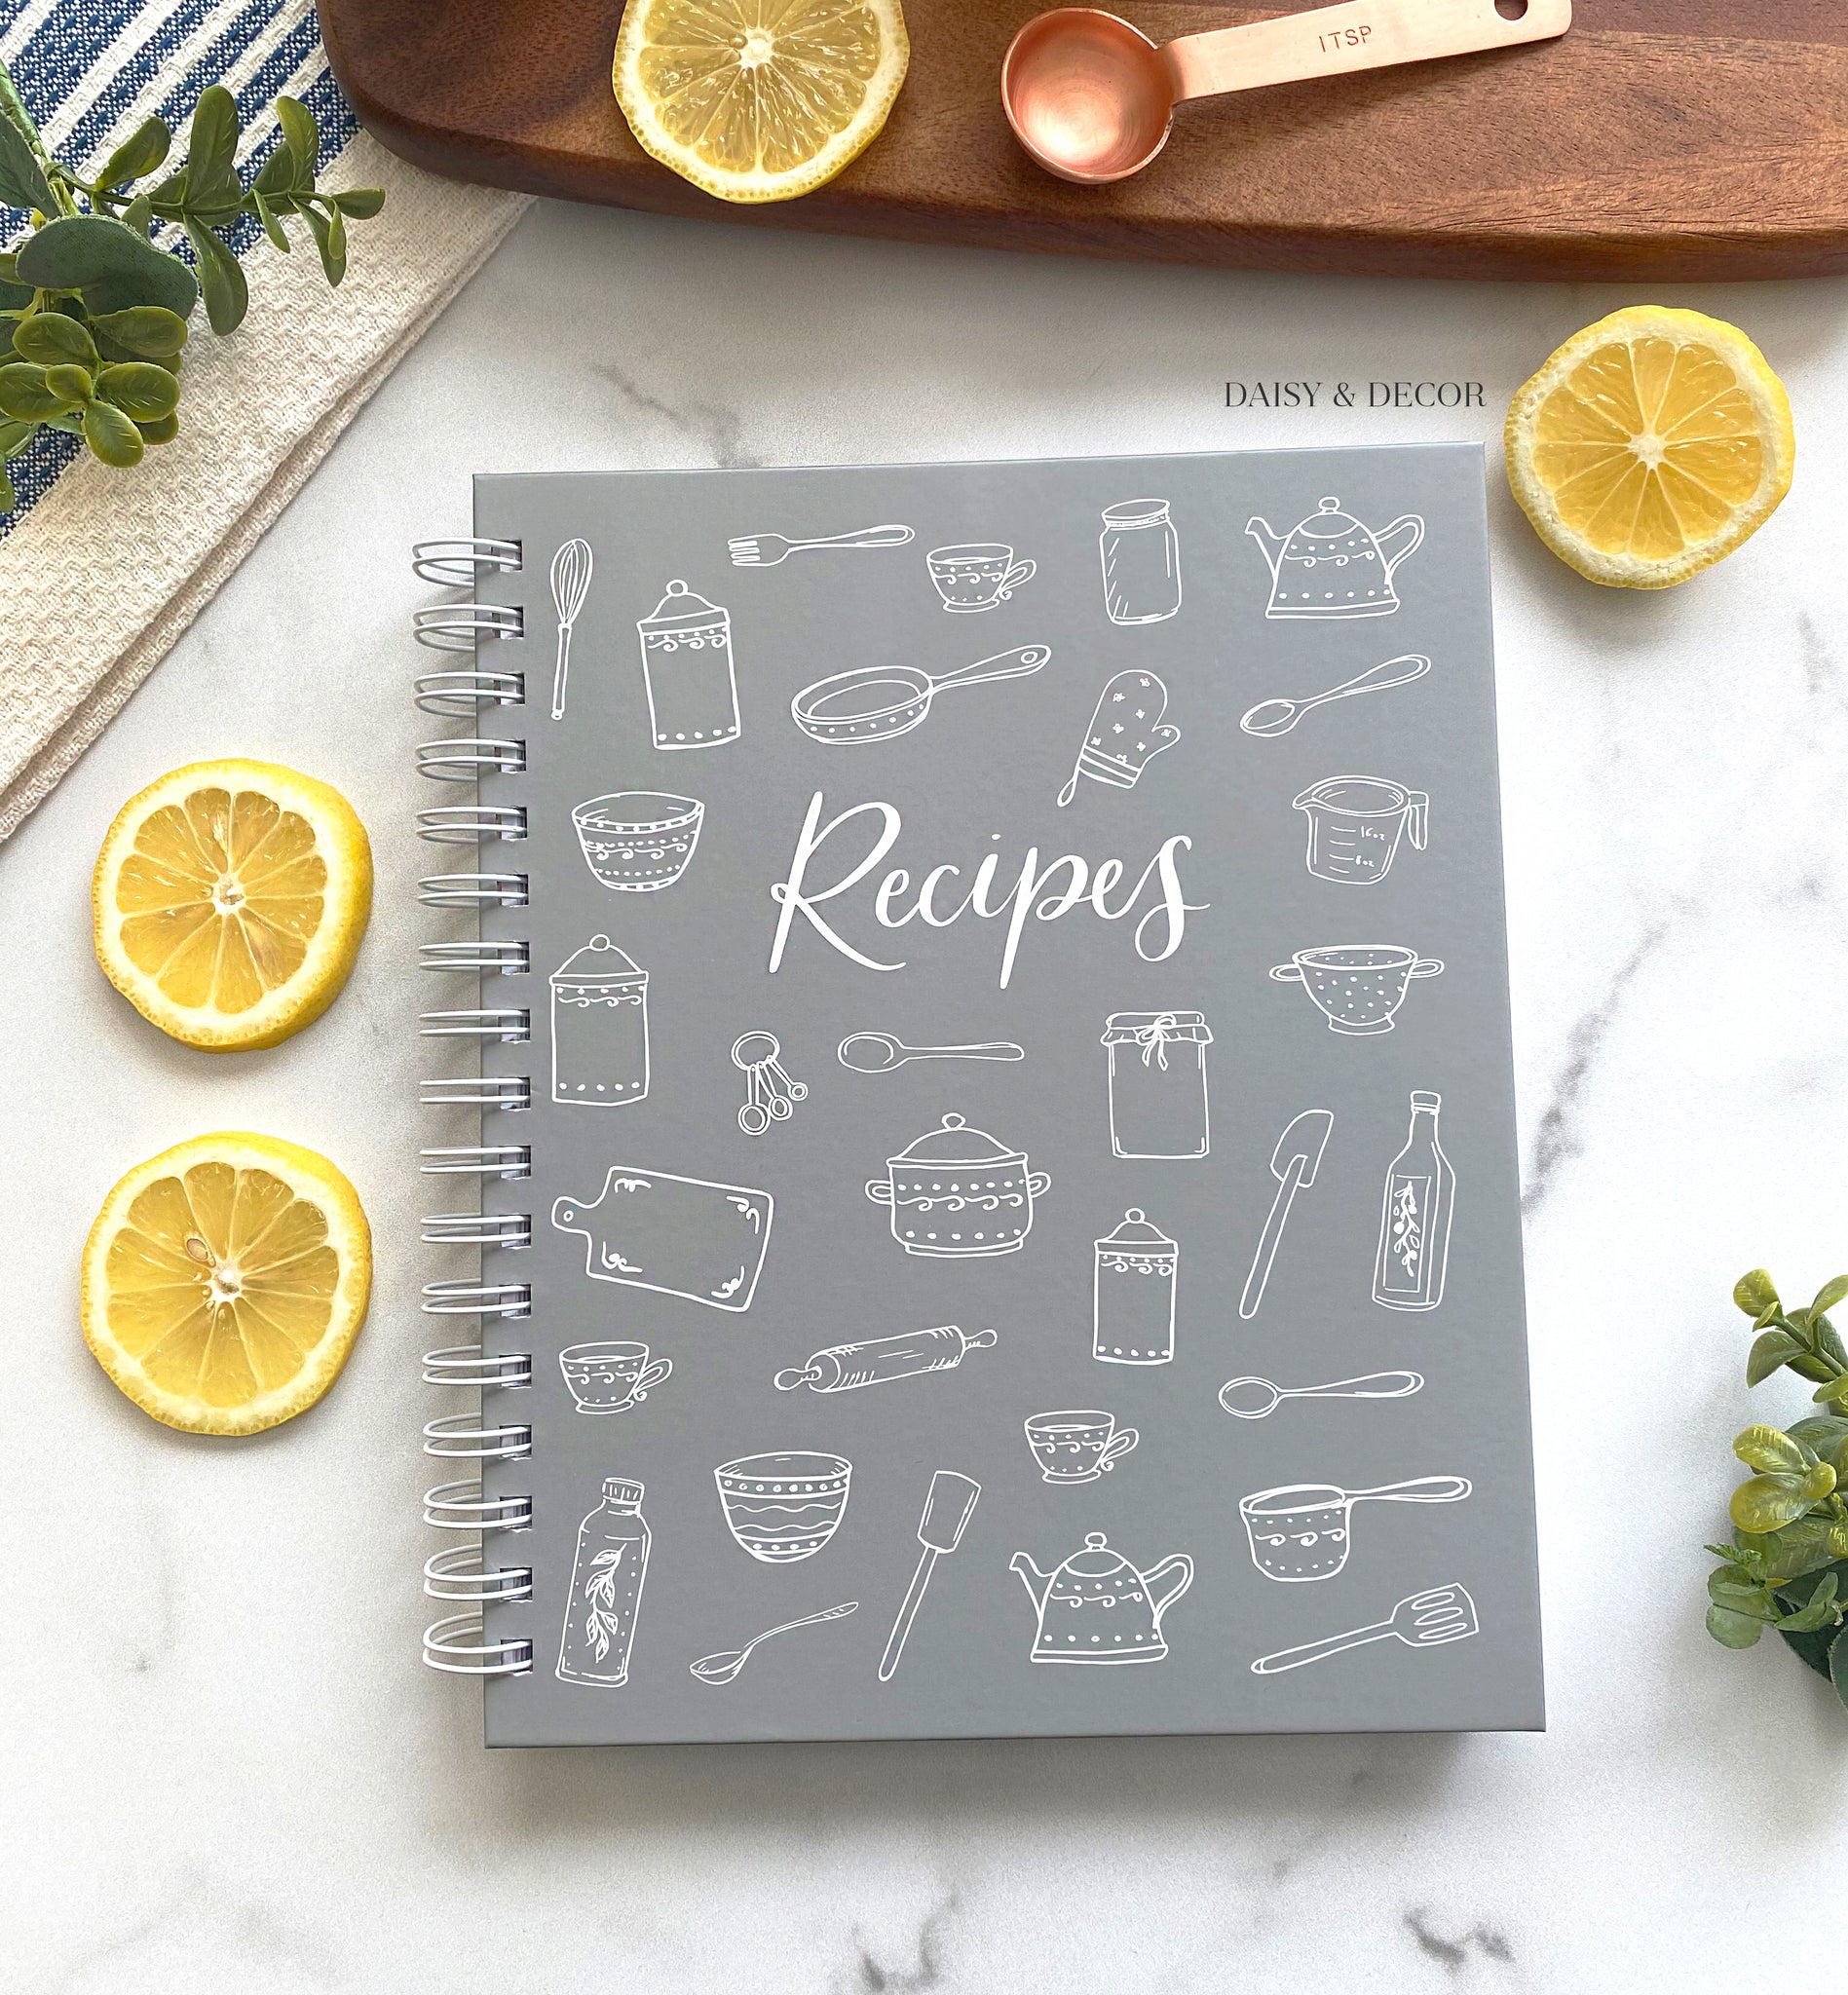 Blank Recipe Book: a Journal of Recipes from My Kitchen: A Blank Recipe Book for Collecting My Very Best Recipes [Book]